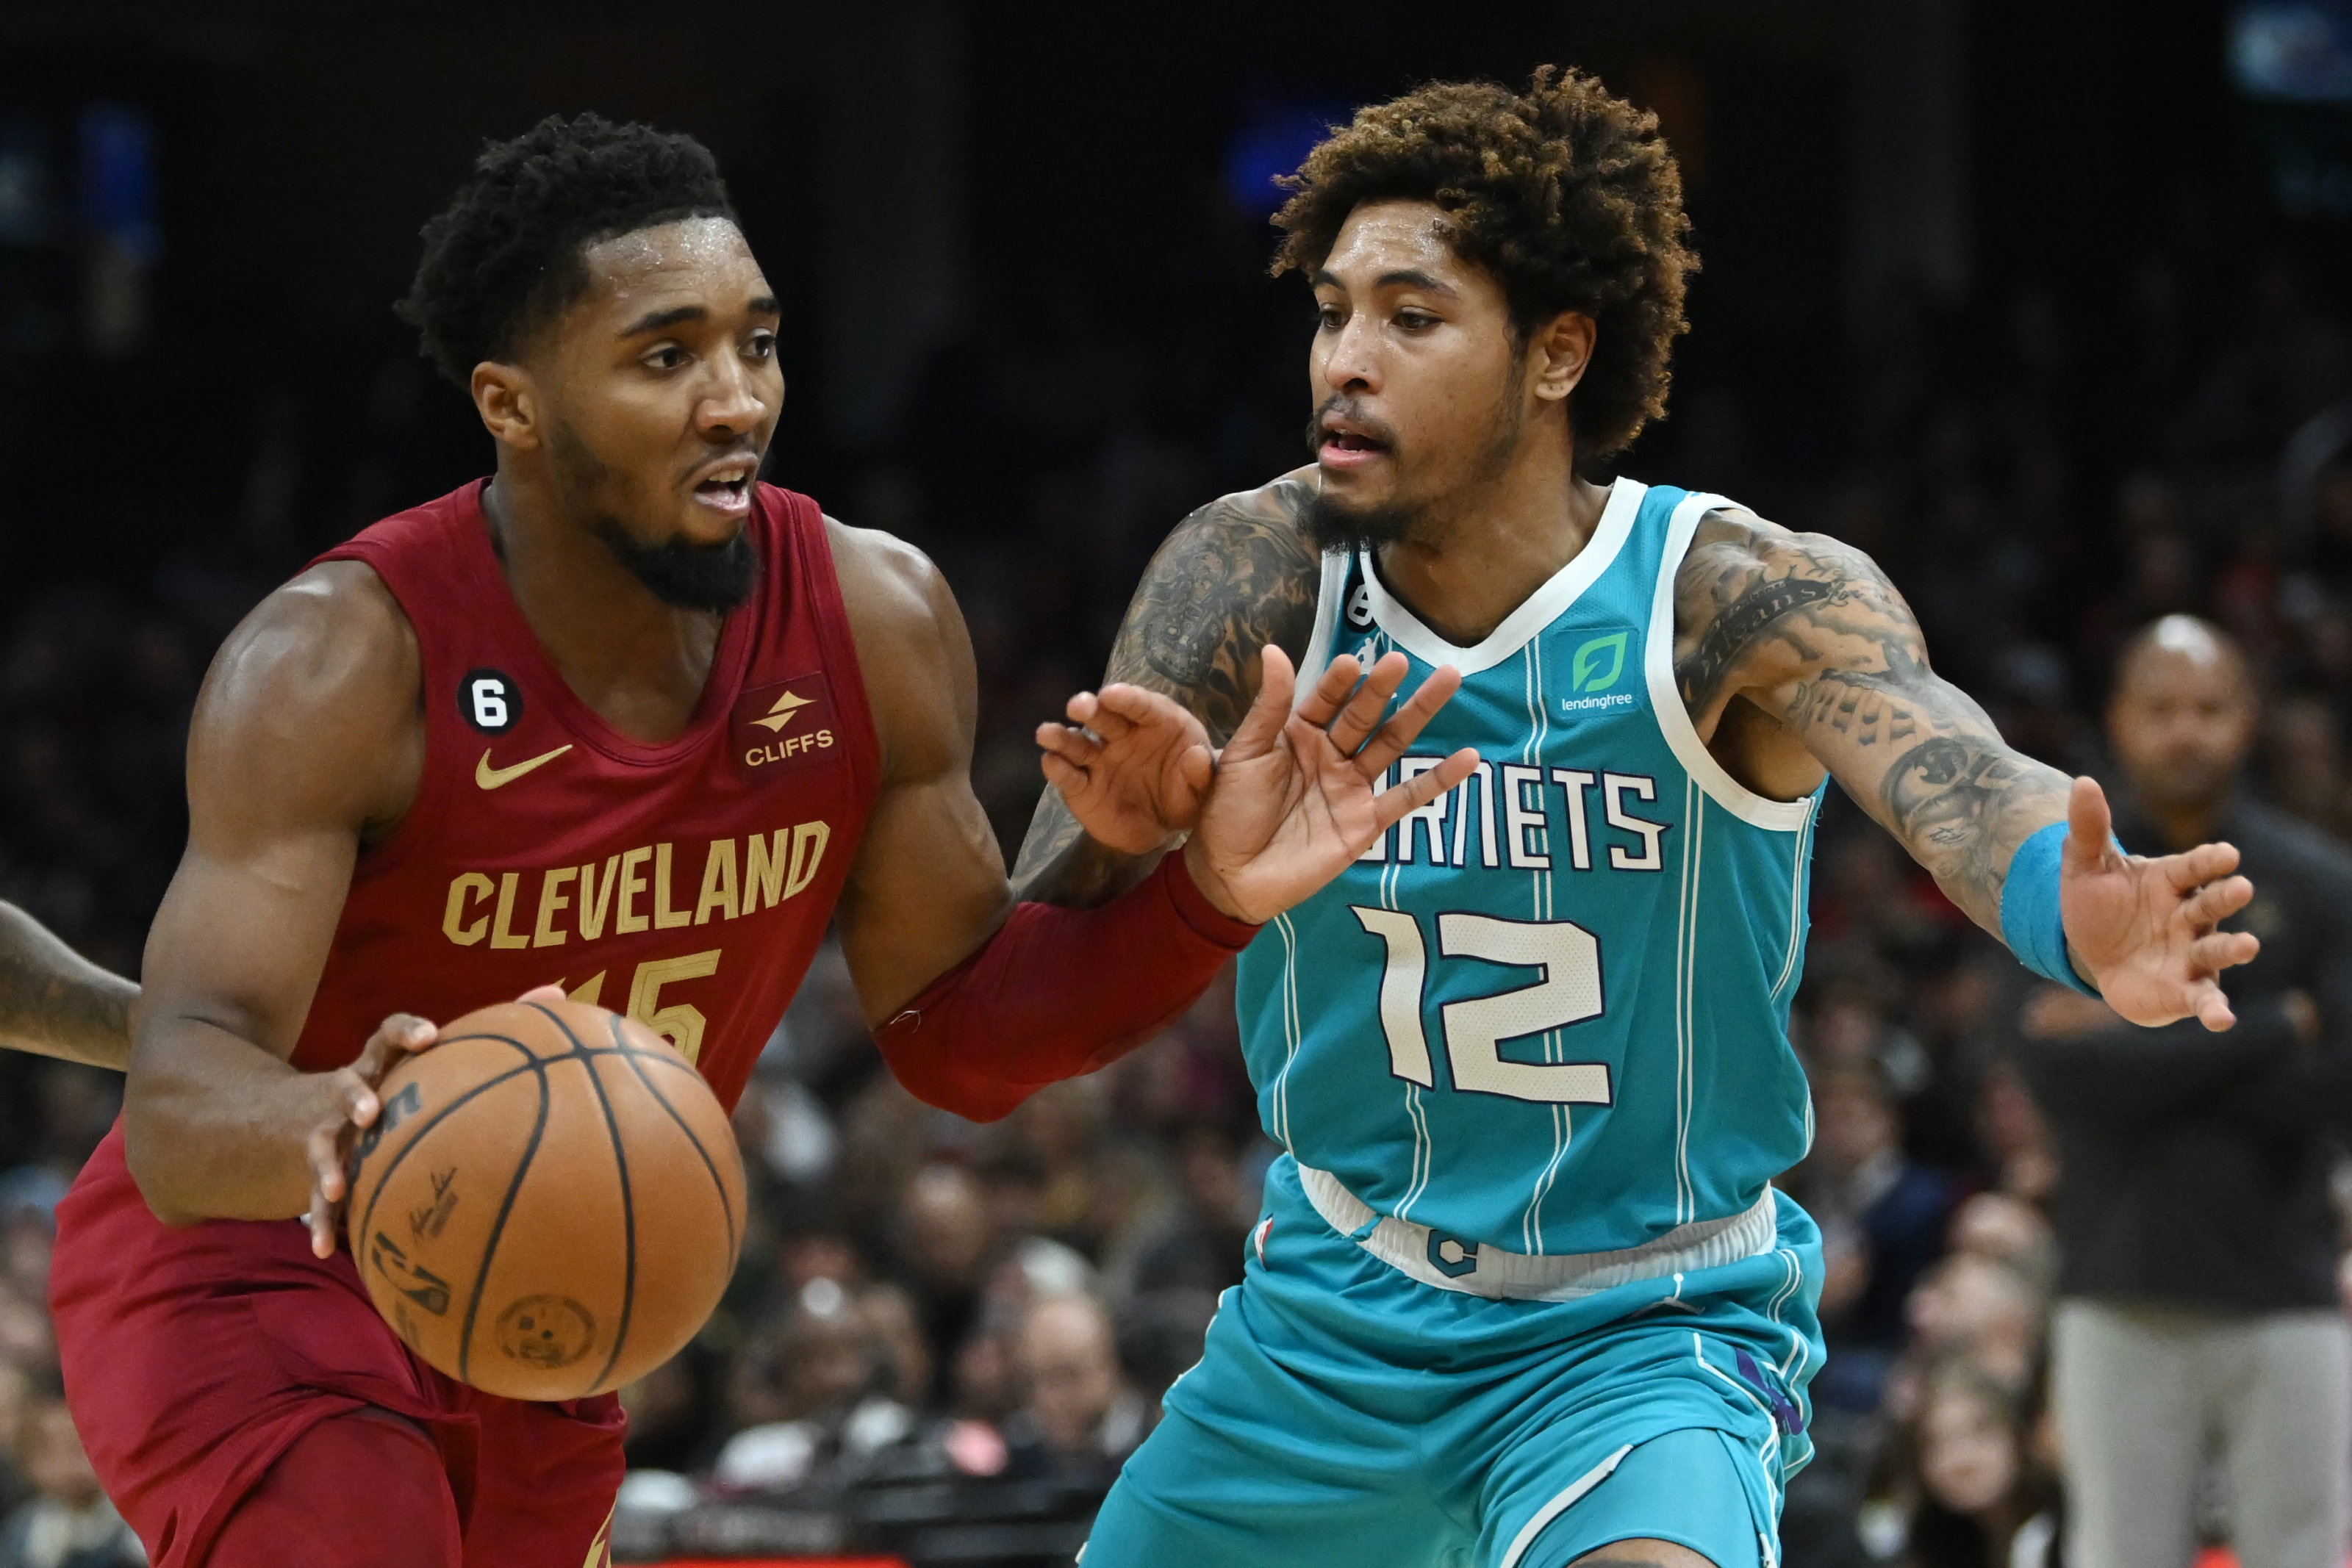 Briant Windhorst suggests a free agent wing target for Cleveland